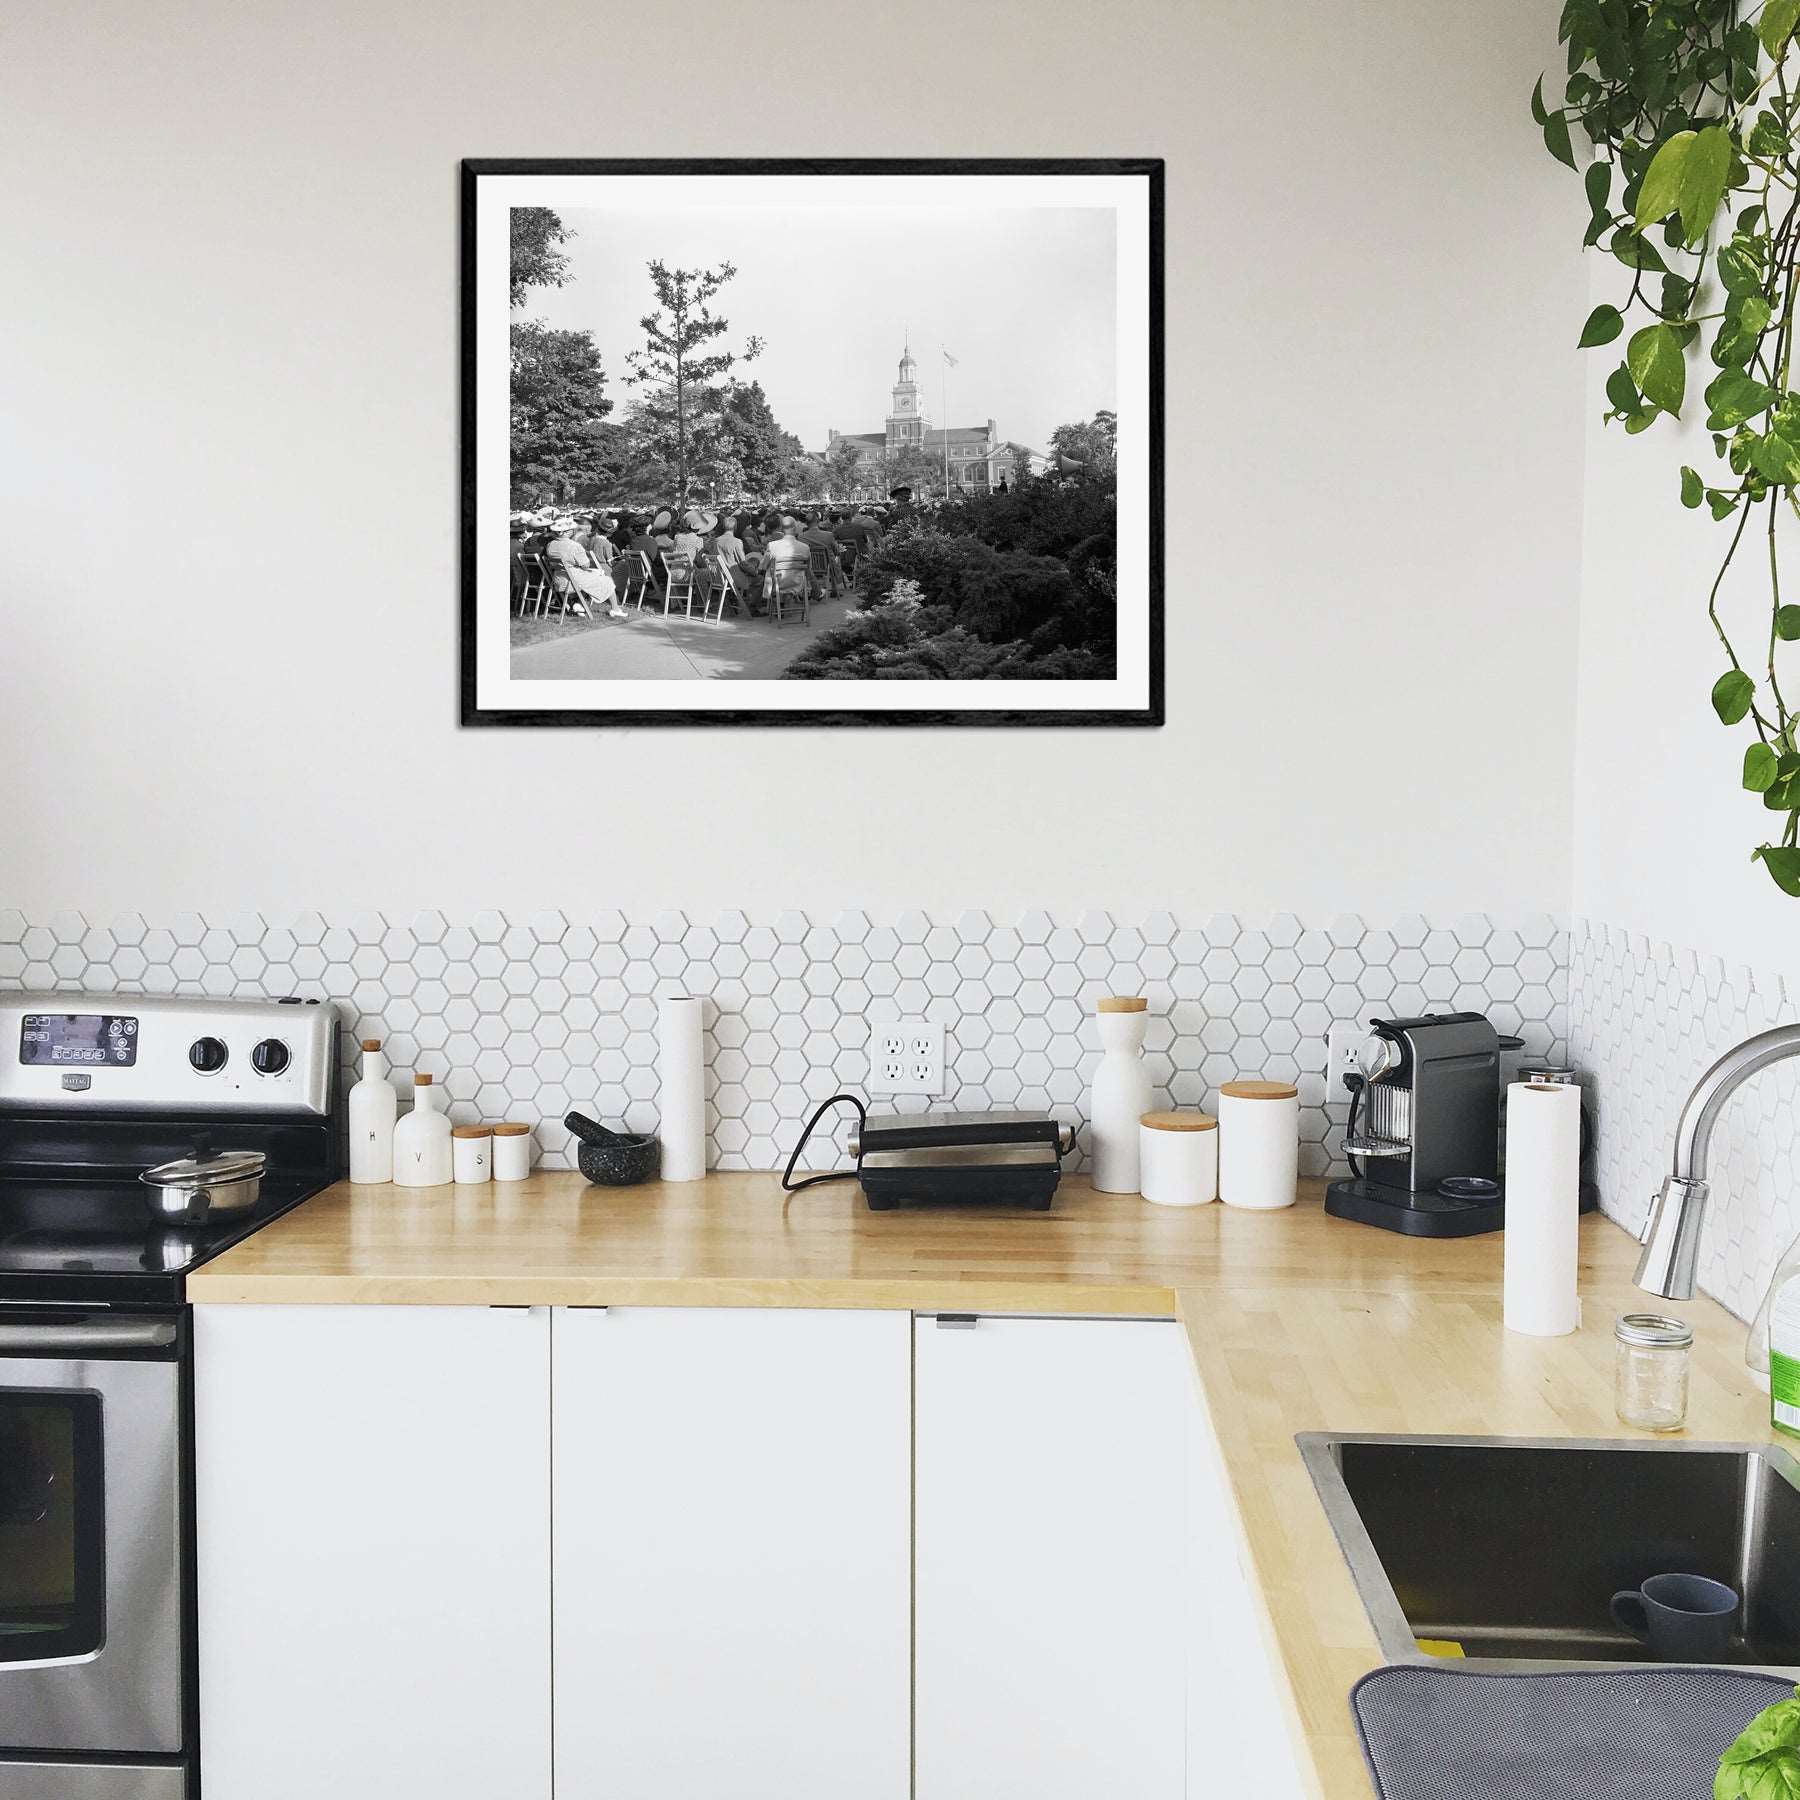 A modern kitchen decorated with a framed paper print of a vintage image of Howard University's commencement